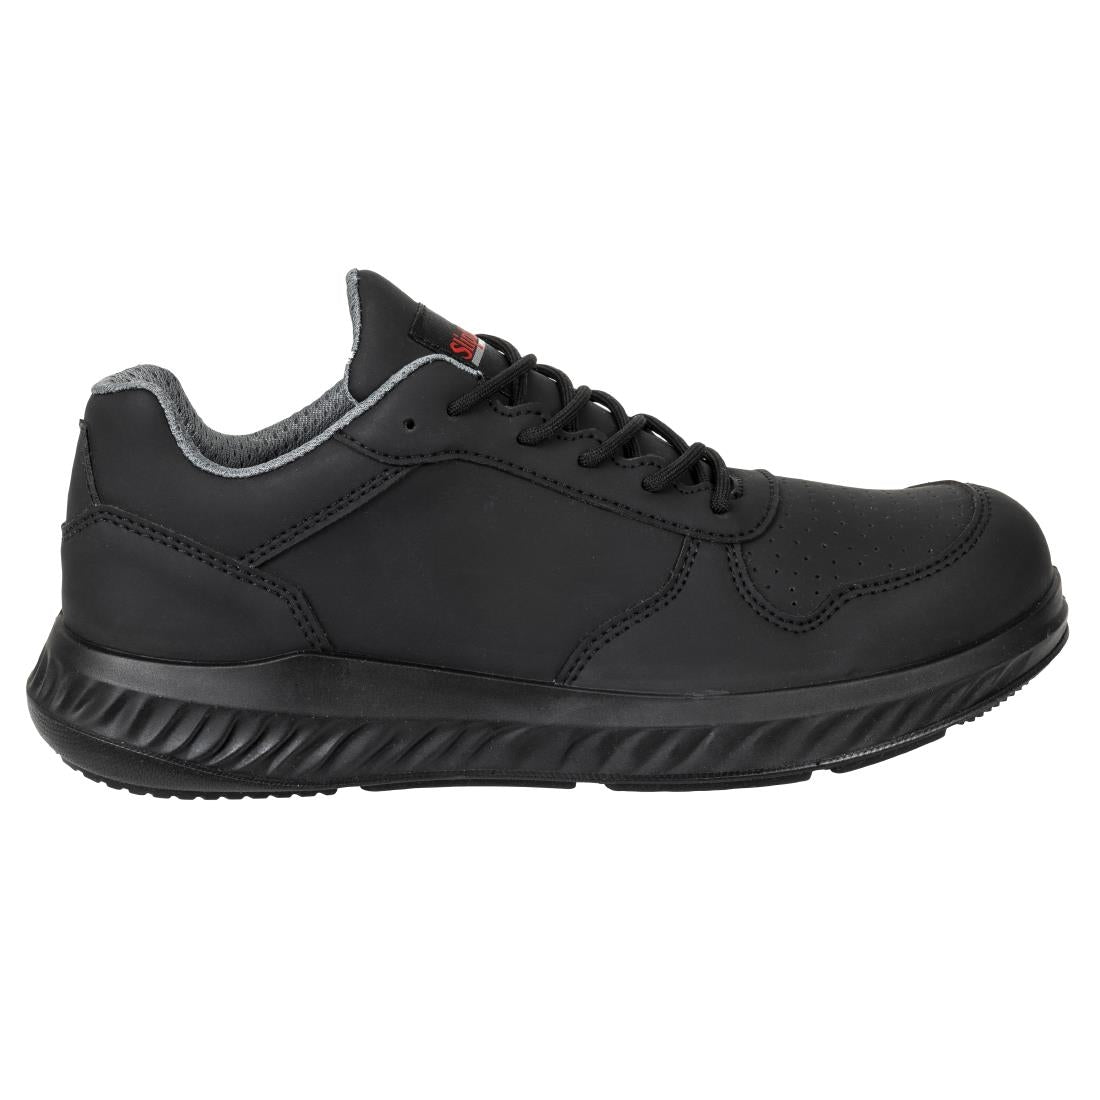 BA063-38 Slipbuster Recycled Microfibre Trainers Matte Black 38 JD Catering Equipment Solutions Ltd